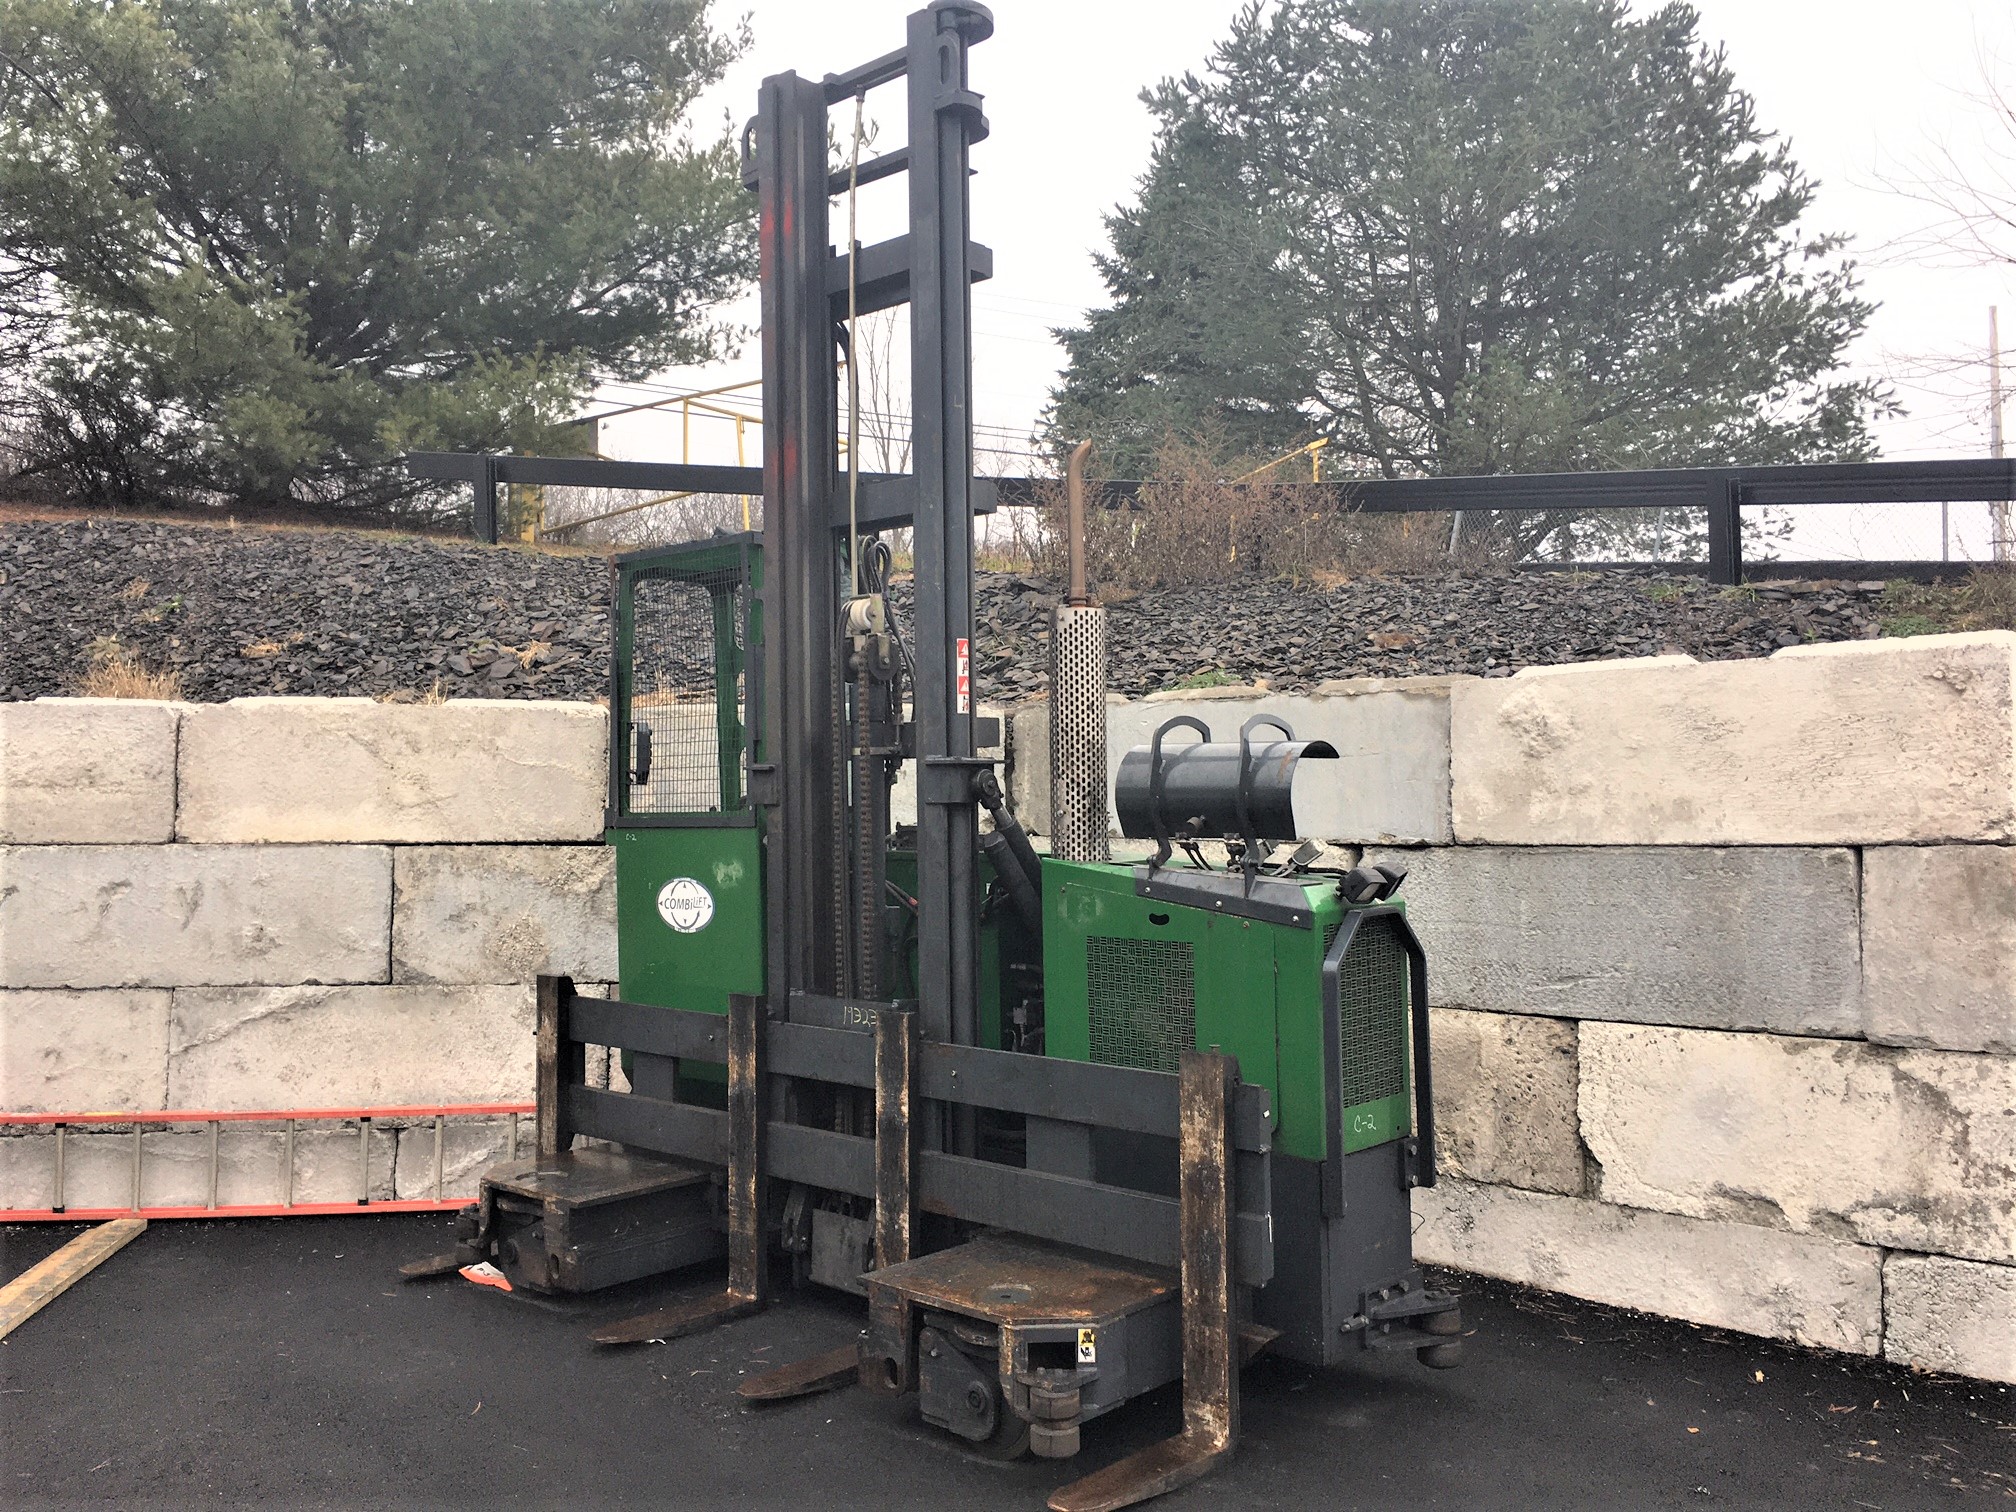 Combilift Bi Directional Forklift. 2013 model C10000GT with 2674 hours. 10'000 lb. for wheel drive side loader forklift. LPG engine with 159 inch two stage mast, 154 inch wide carriage and 4 forks. 17'200 lb. unladen weight.